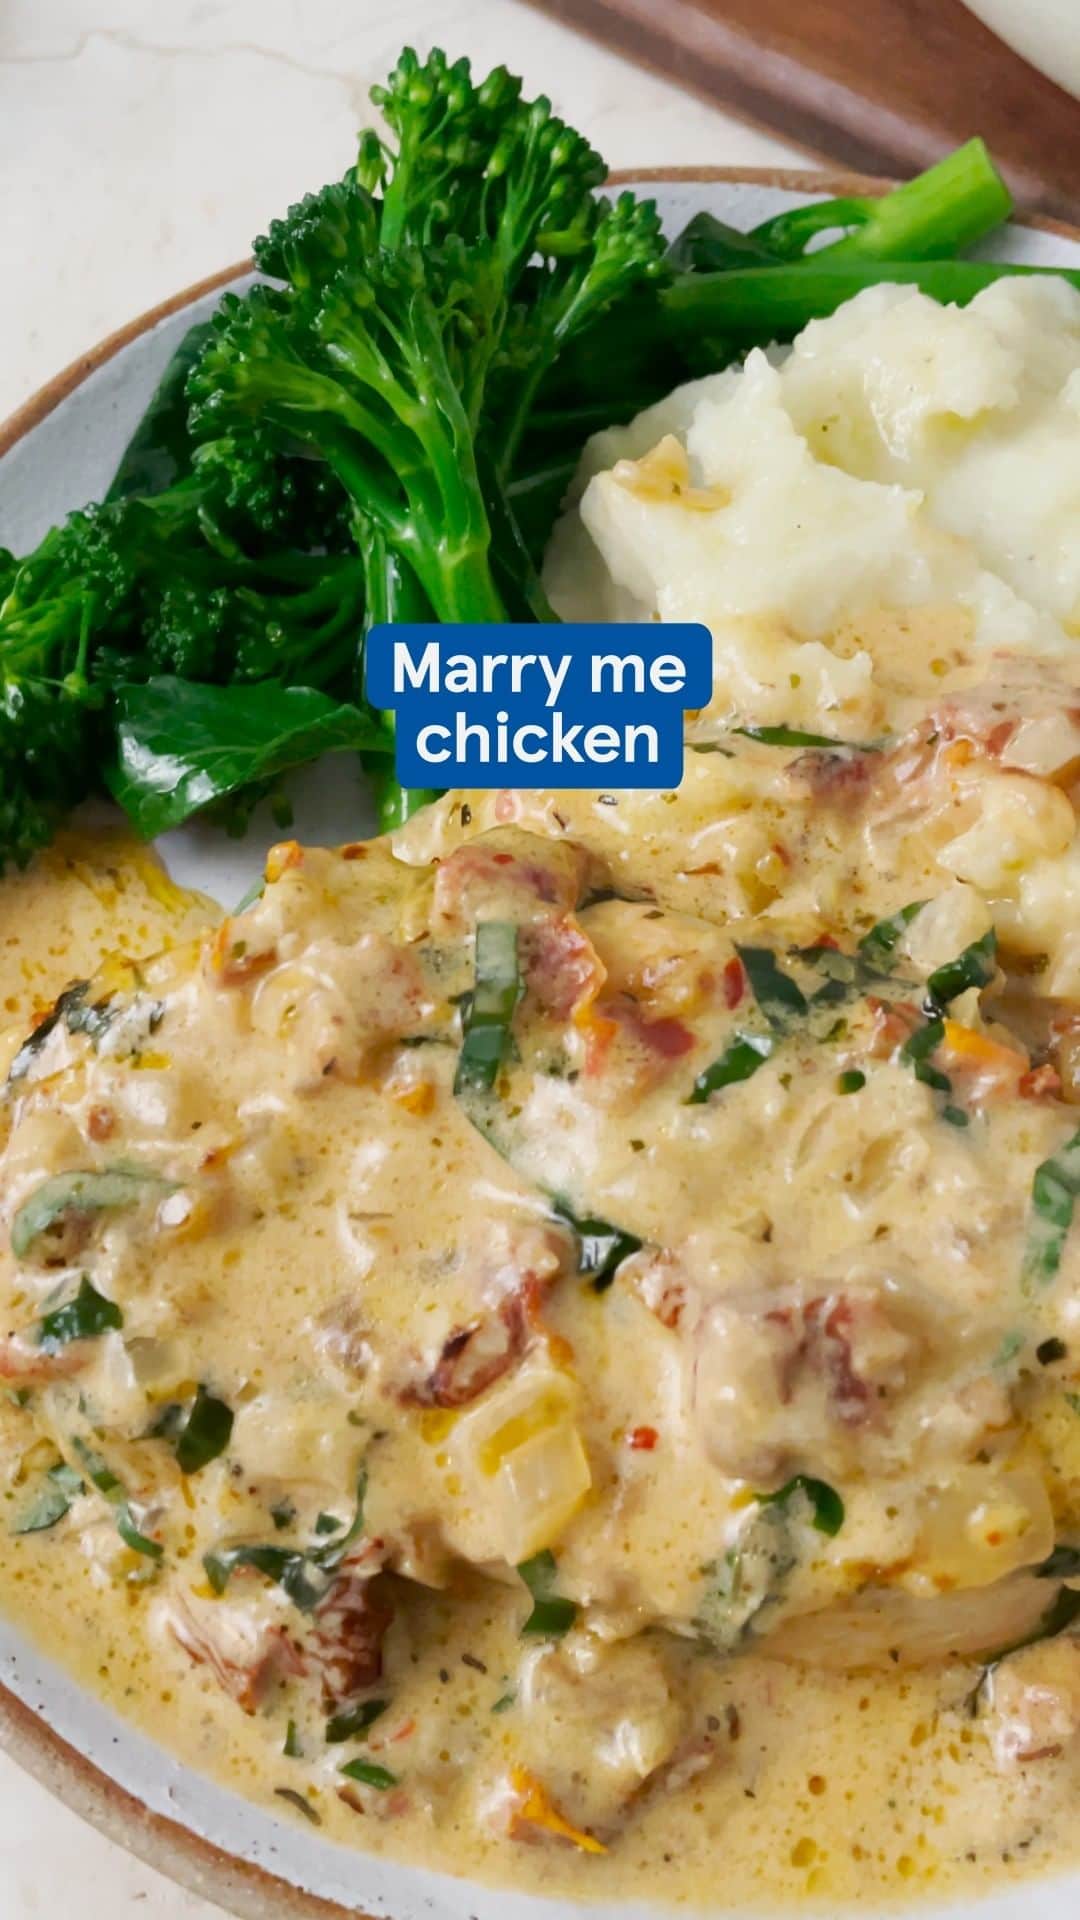 Tesco Food Officialのインスタグラム：「Level up date night with this sumptuous chicken dinner. Tastes so good, they might even pop the question before dessert 💍 Find the recipe below.  Serves 4  plain flour, for dusting 4 chicken breasts 2 tbsp olive oil 1 onion, finely chopped 3 garlic cloves, crushed 200ml double cream 150ml chicken stock 100g sundried tomatoes, finely chopped ½ tsp chilli flakes 1 tsp mixed herbs 25g Parmesan, finely grated ½ bunch fresh basil, shredded mash or crispy potatoes, to serve tenderstem broccoli, to serve   1. Tip enough plain flour onto a dinner plate to cover it well. Season the chicken breasts on both sides and coat in the plain flour, shaking off any excess. 2. Heat 1 tbsp of the oil in a non-stick frying pan, and over a medium-high heat fry the chicken breasts for 5 mins on each side or until golden brown. Remove from the pan and set aside on a plate while you make the sauce. 3. Heat the remaining 1 tbsp oil and gently fry the onion and garlic over a medium heat for 5-7 mins, until softened. Add the cream, chicken stock, most of the sundried tomatoes (reserve a few to serve), chilli flakes and mixed herbs.  4. Stir to combine then add the chicken breasts back to the pan. Simmer gently for 10-12 mins or until the chicken is cooked through. You might need to turn your chicken breasts over if they’re big, to cook evenly. 5. Stir though the Parmesan and scatter over the remaining sundried tomatoes along with the fresh basil to serve.」